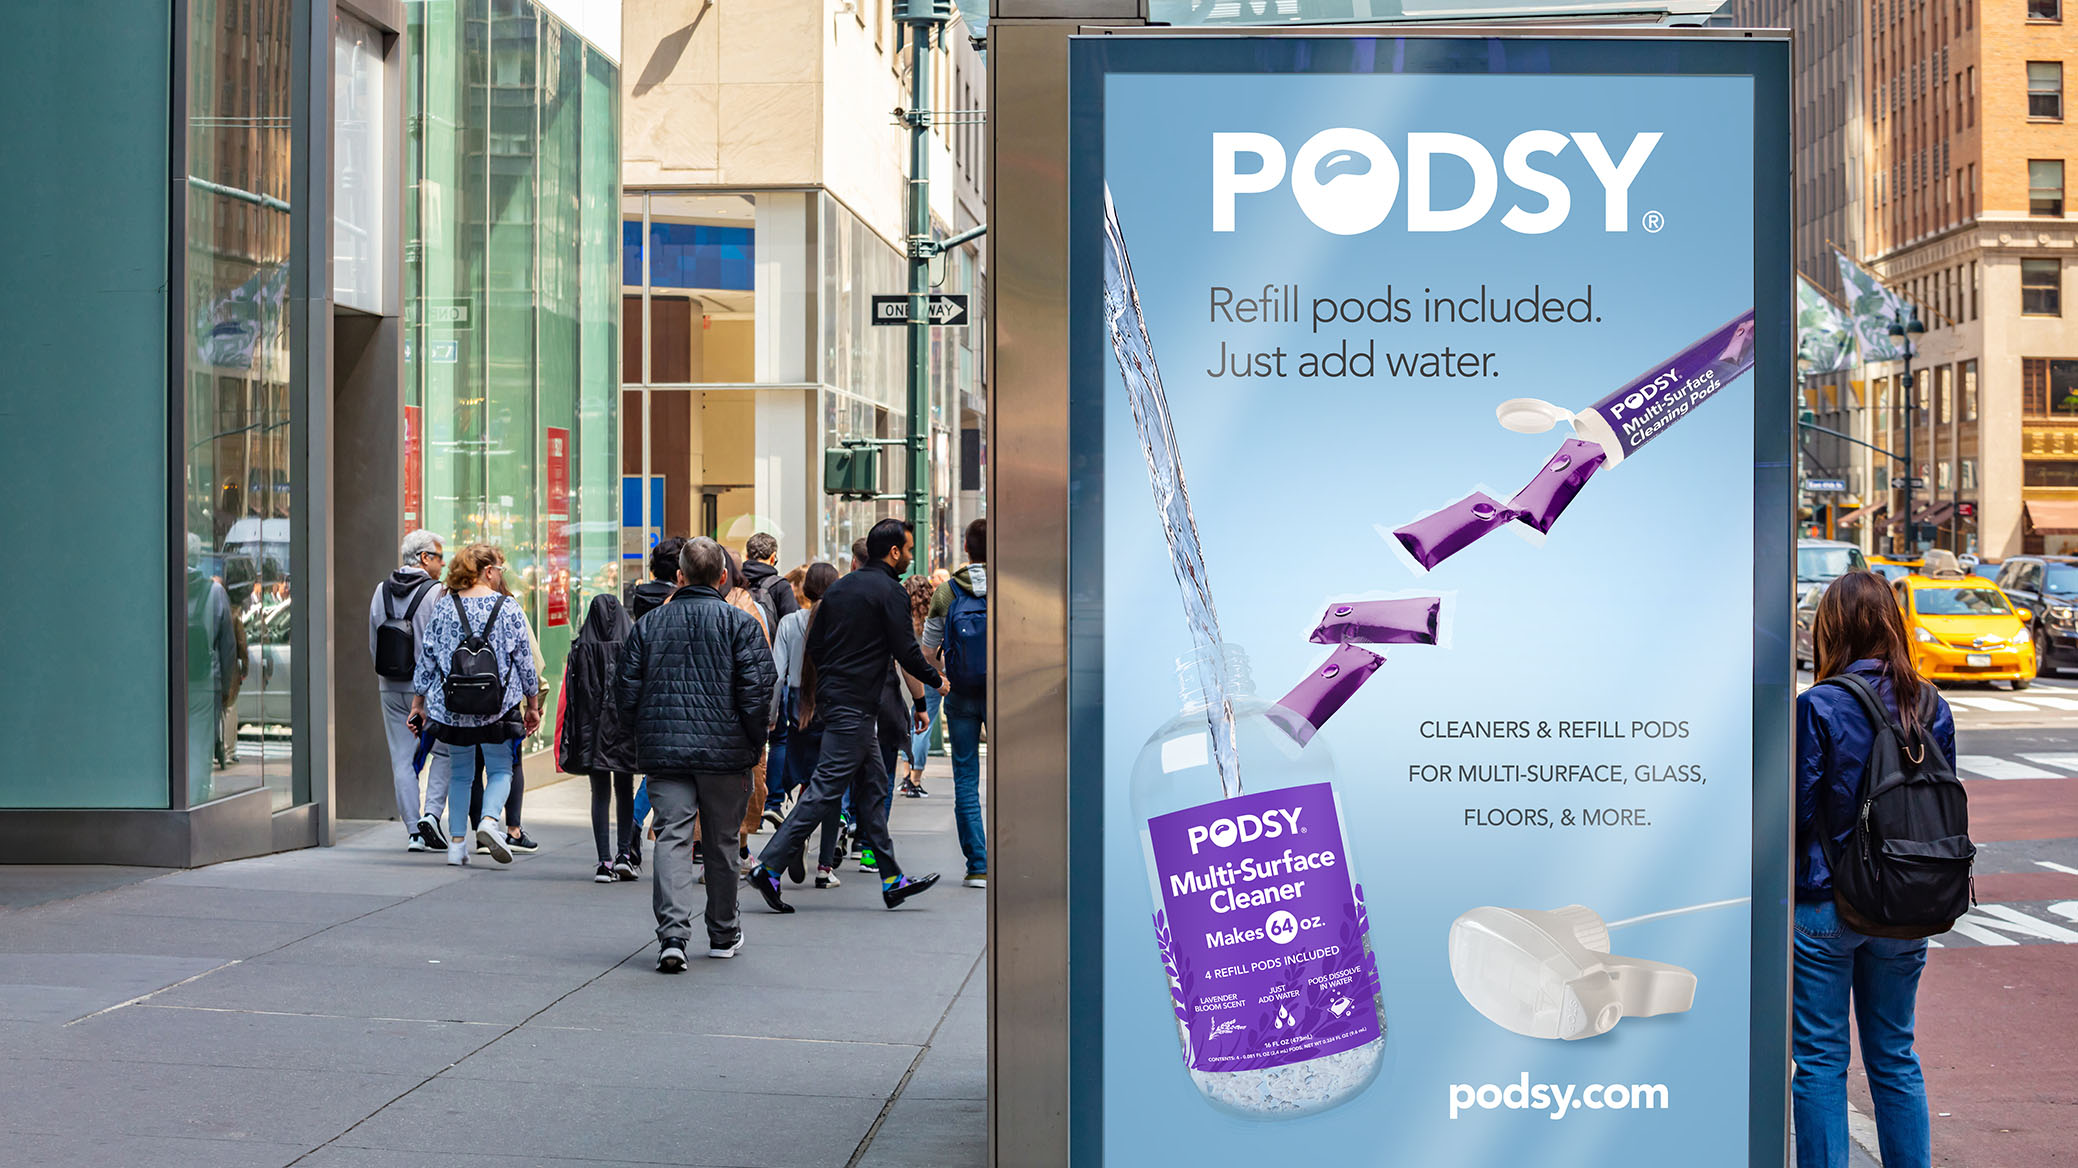 Podsy OOH Advertising